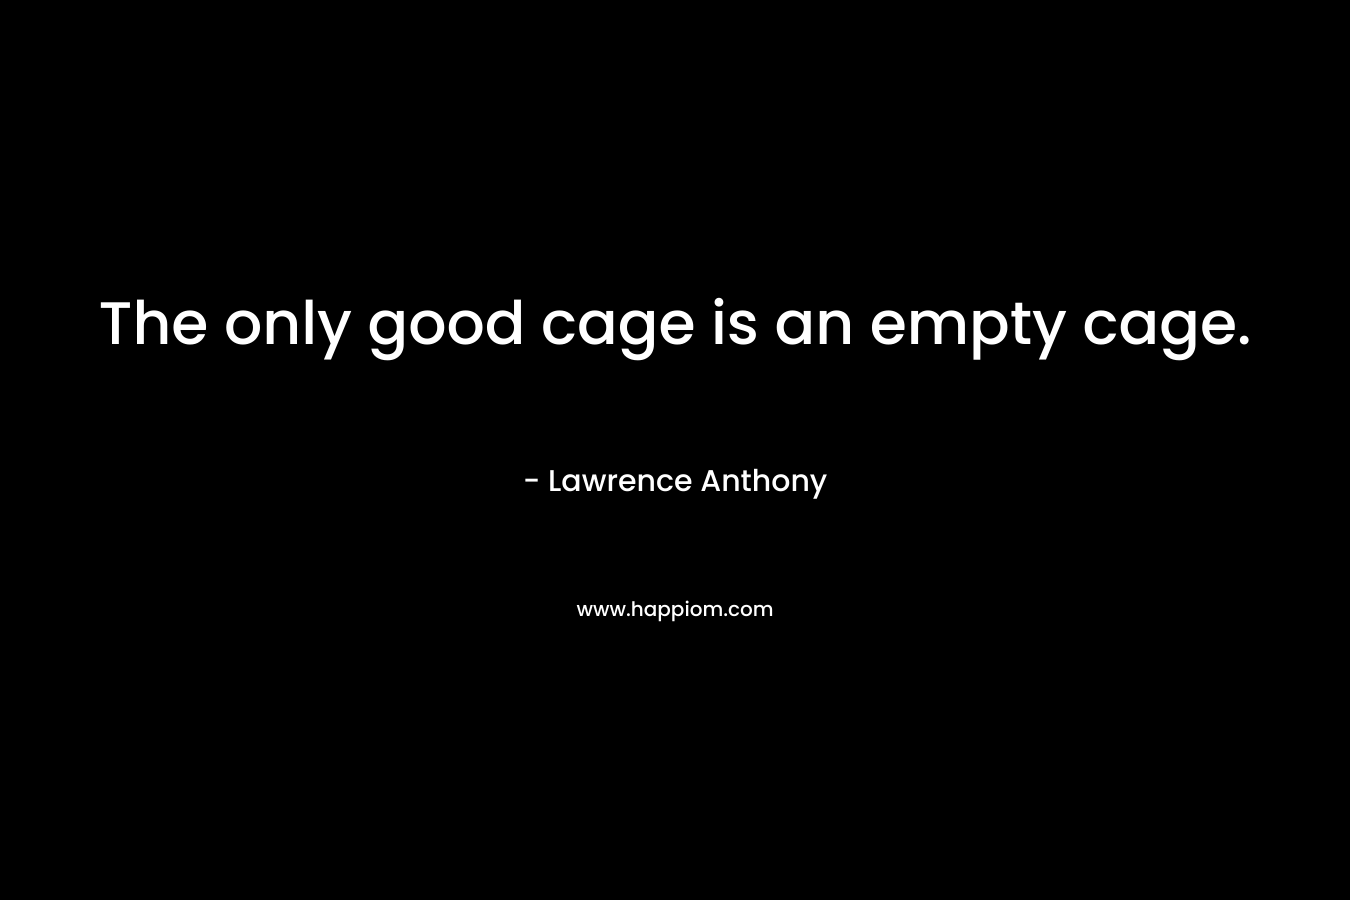 The only good cage is an empty cage.